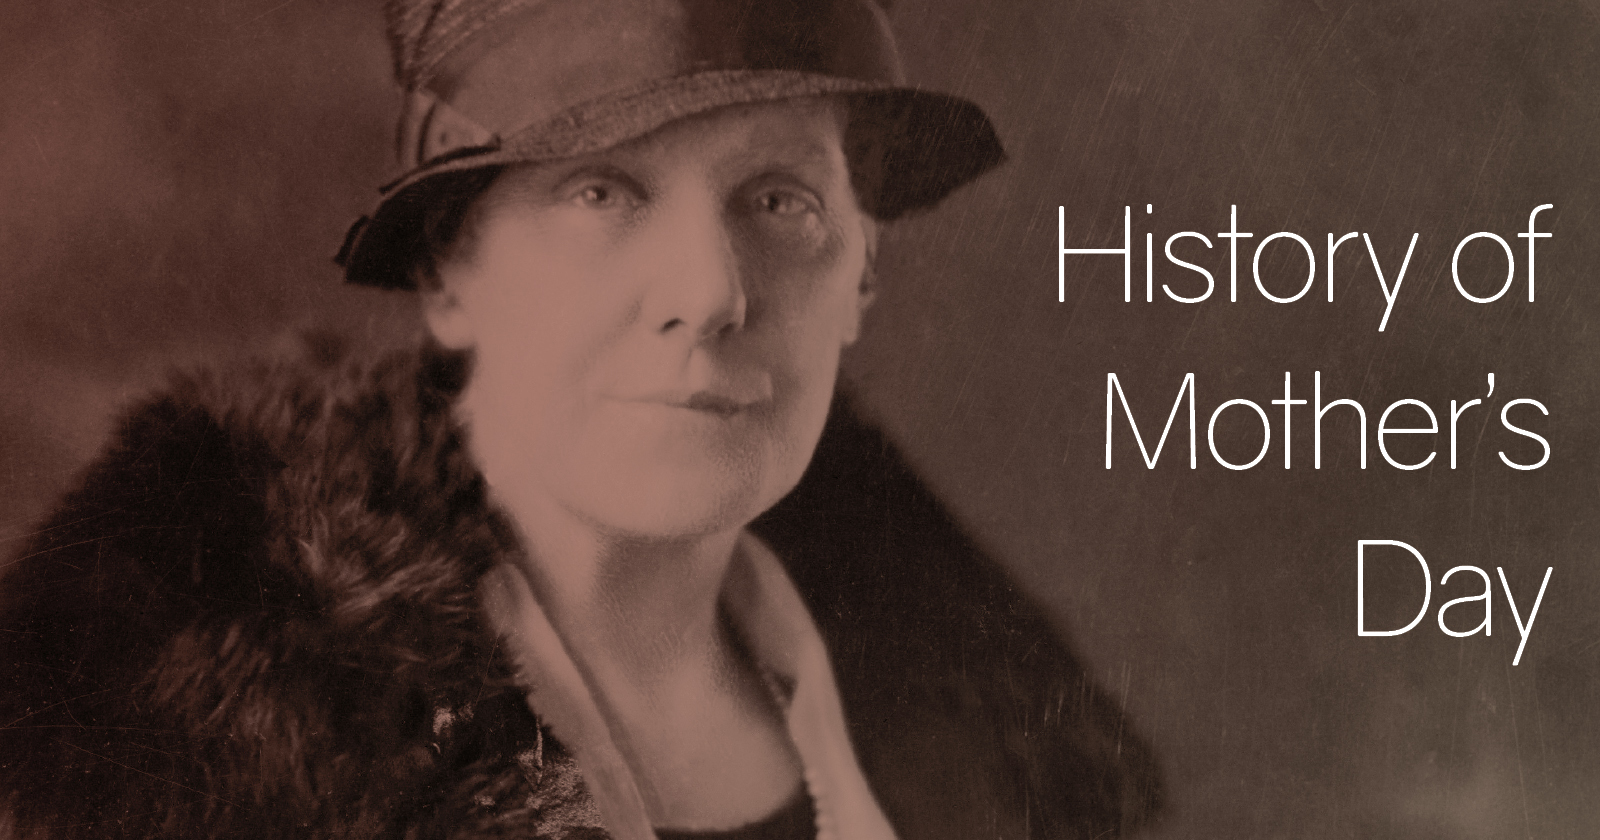 History Of Mother s Day National Women s History Alliance